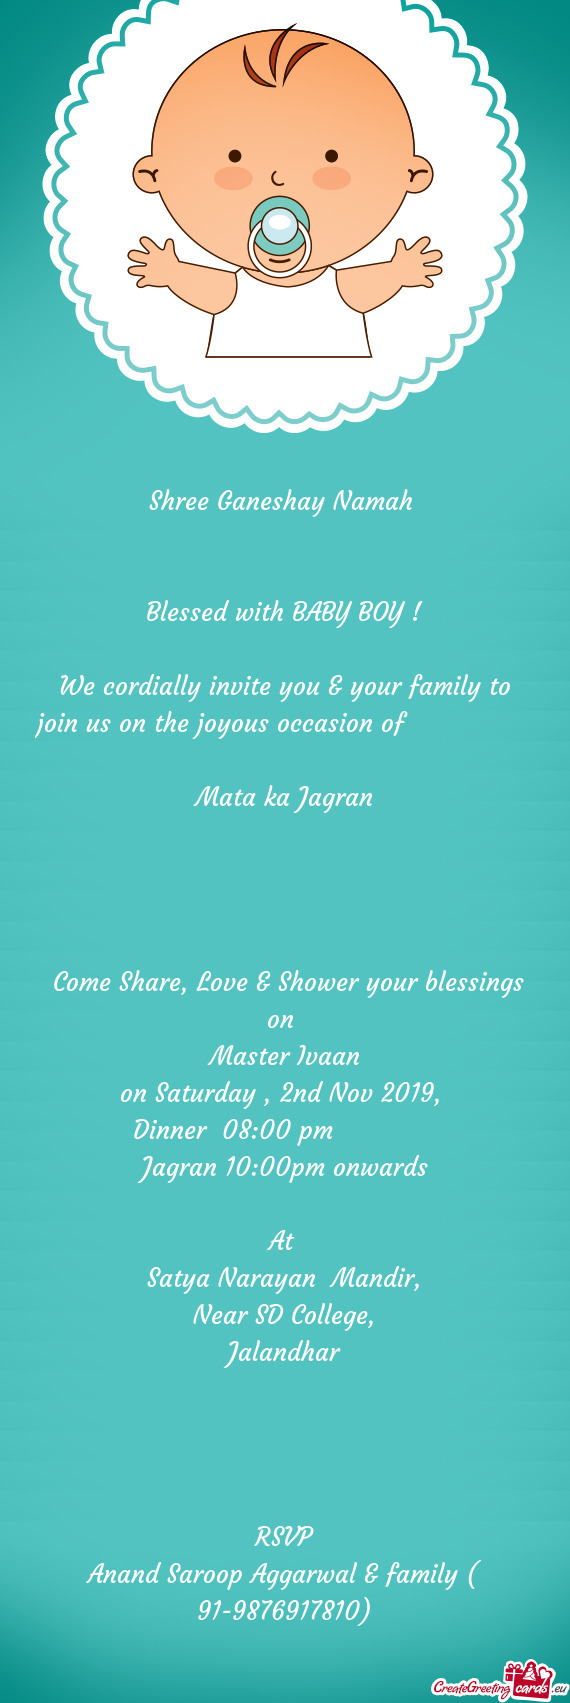 We cordially invite you & your family to join us on the joyous occasion of     Mata ka